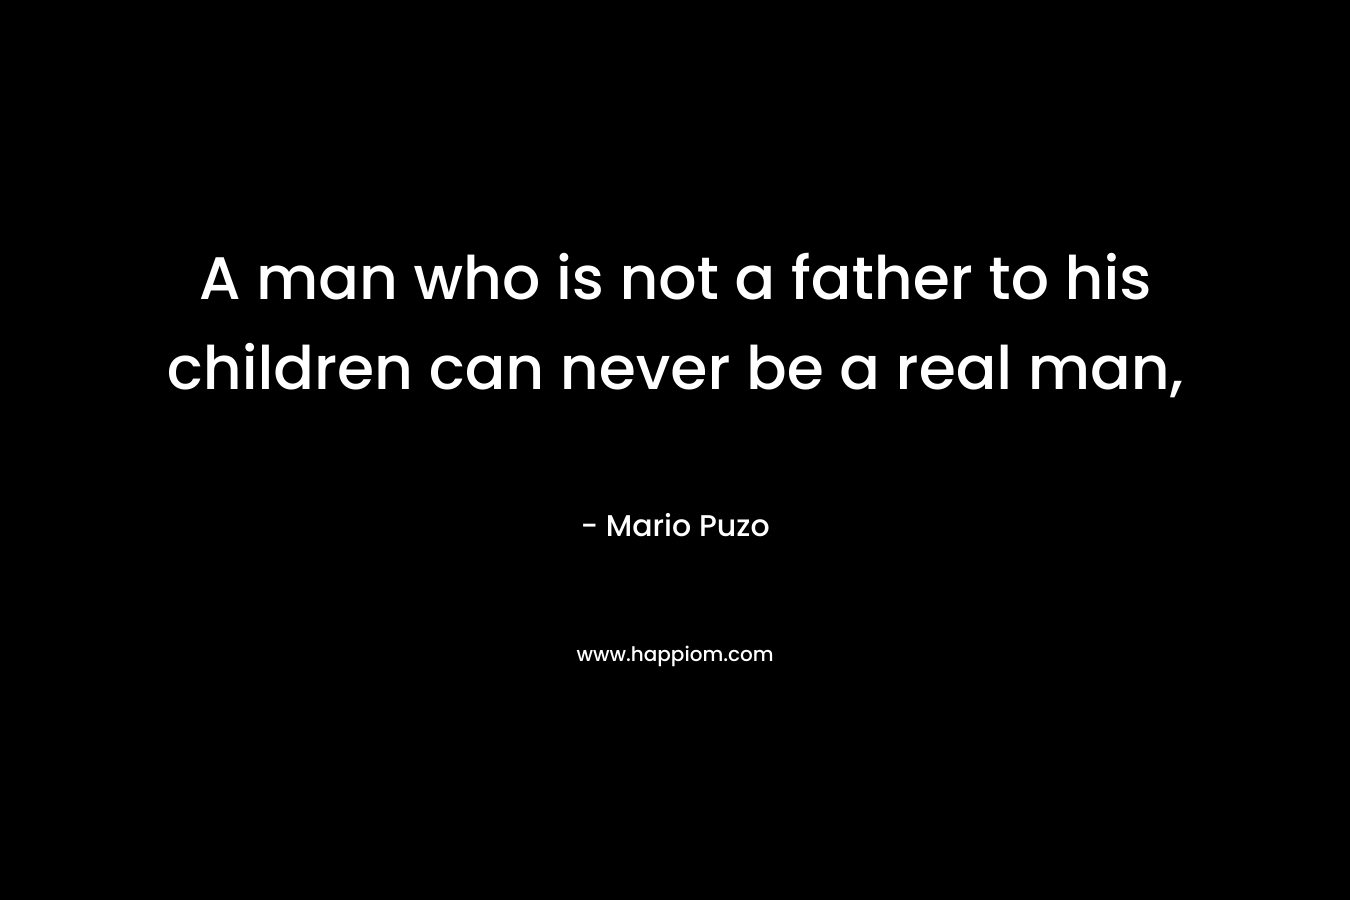 A man who is not a father to his children can never be a real man,